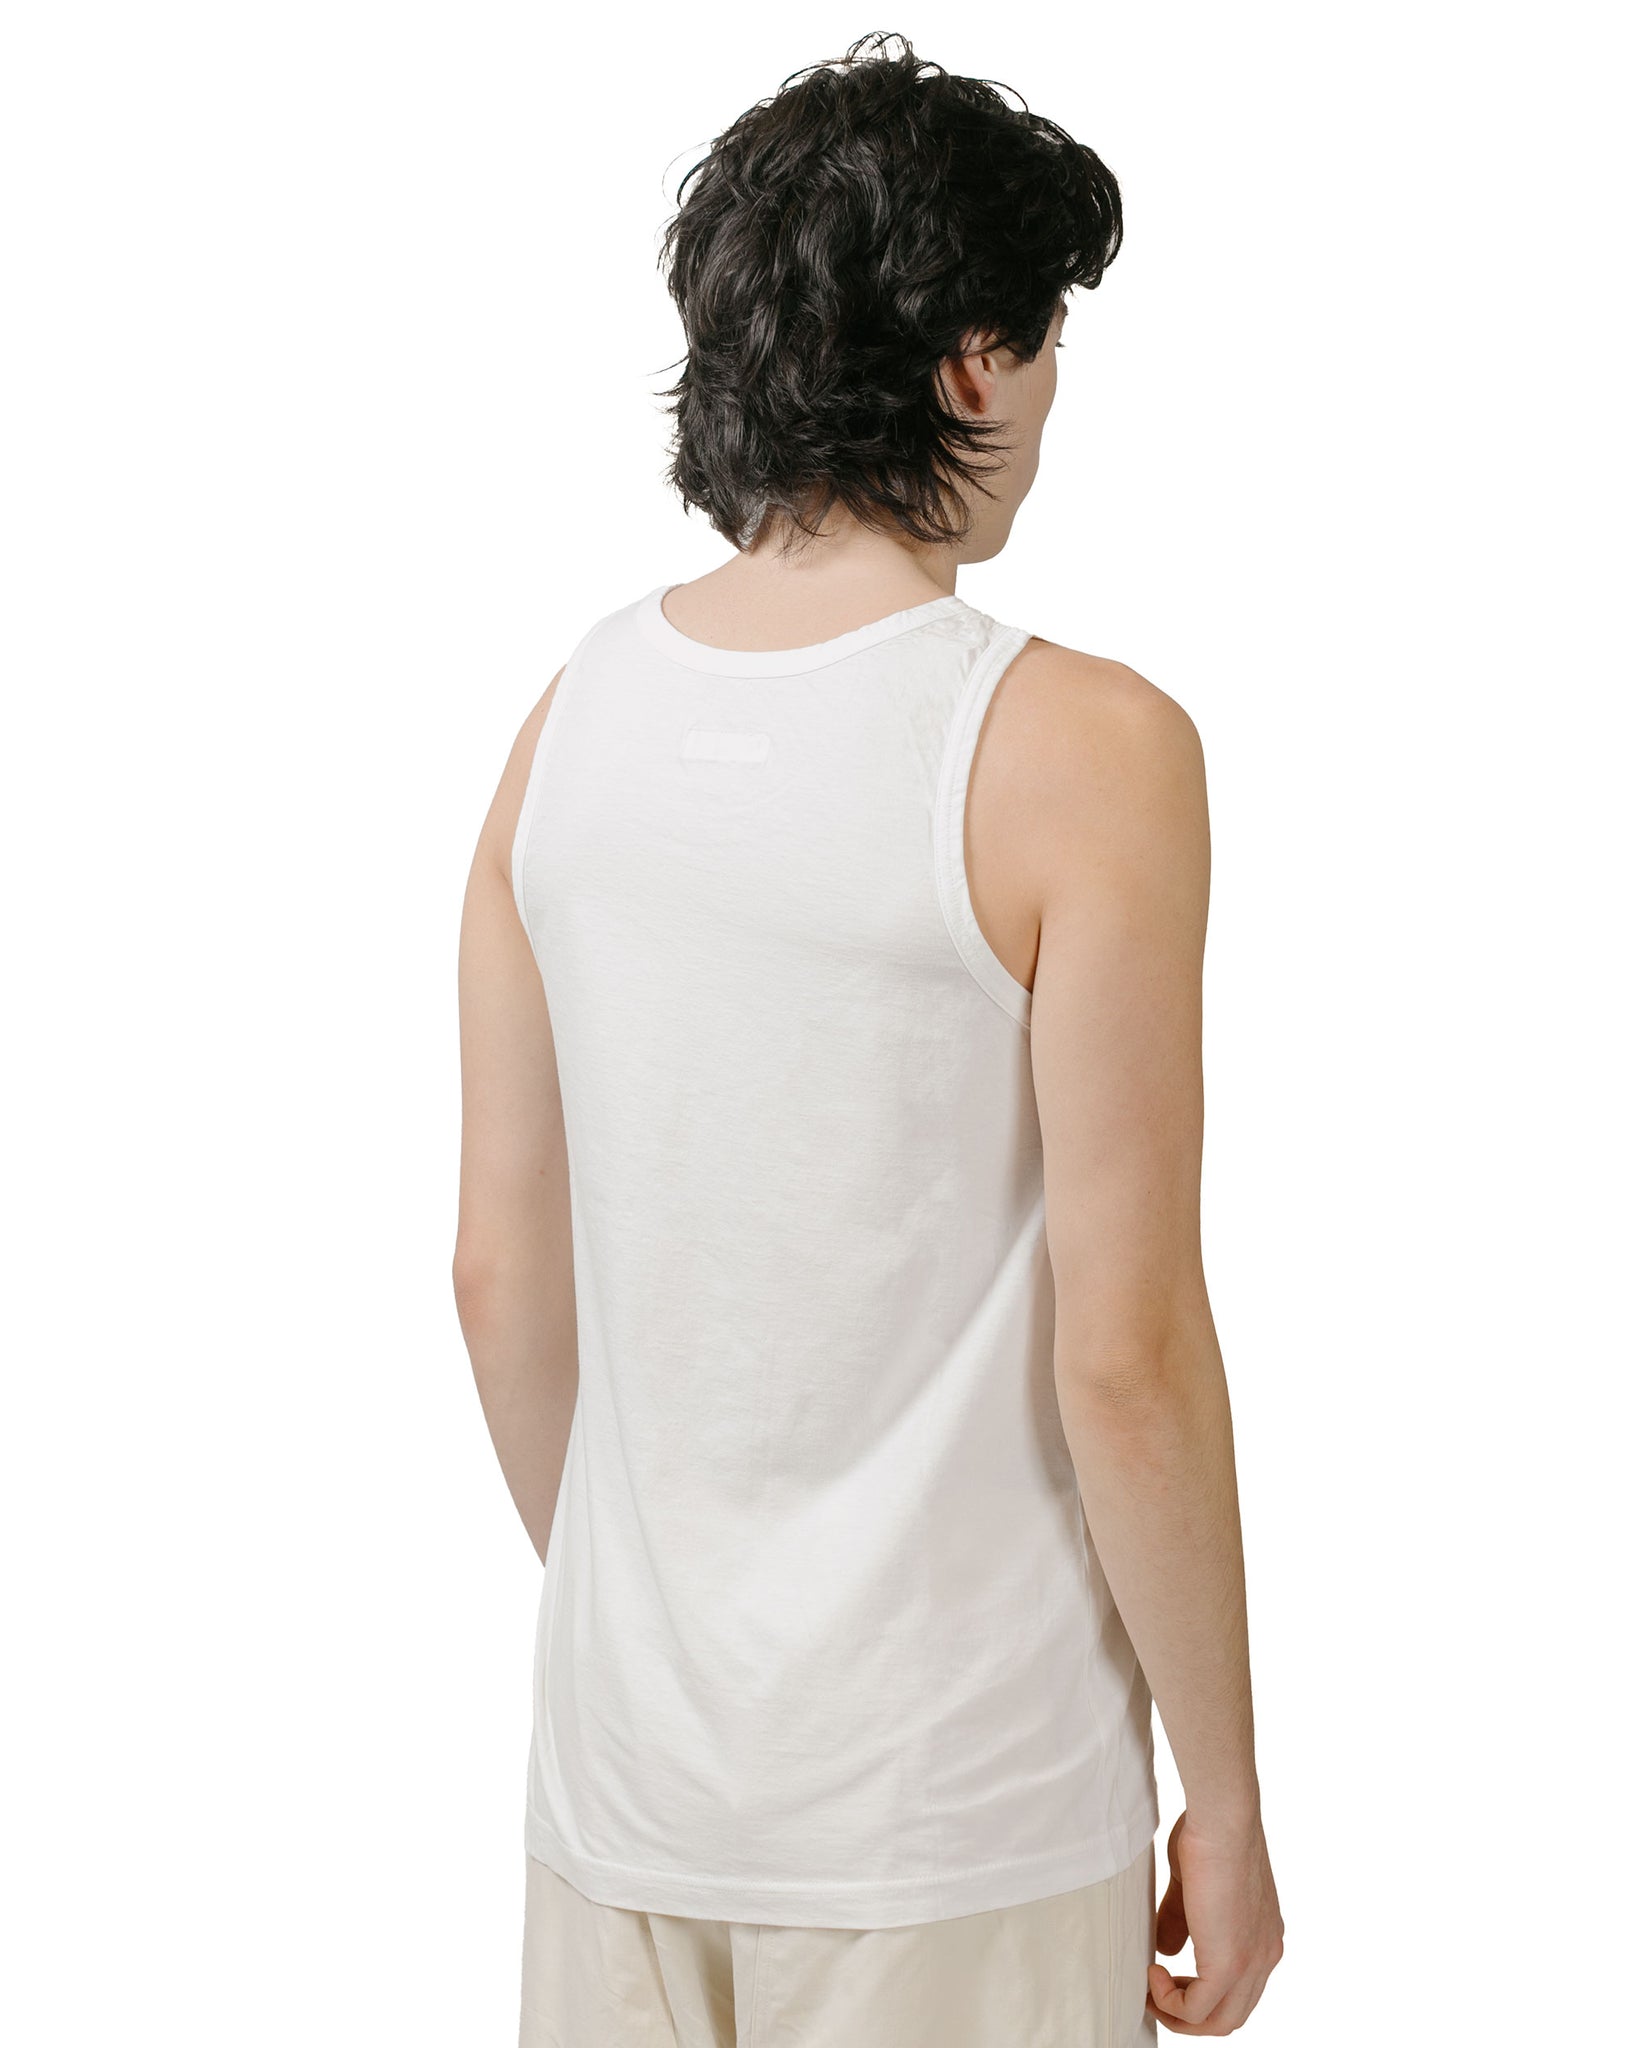 ts(s) Tank Top High Gauge Cotton Jersey Off White model back